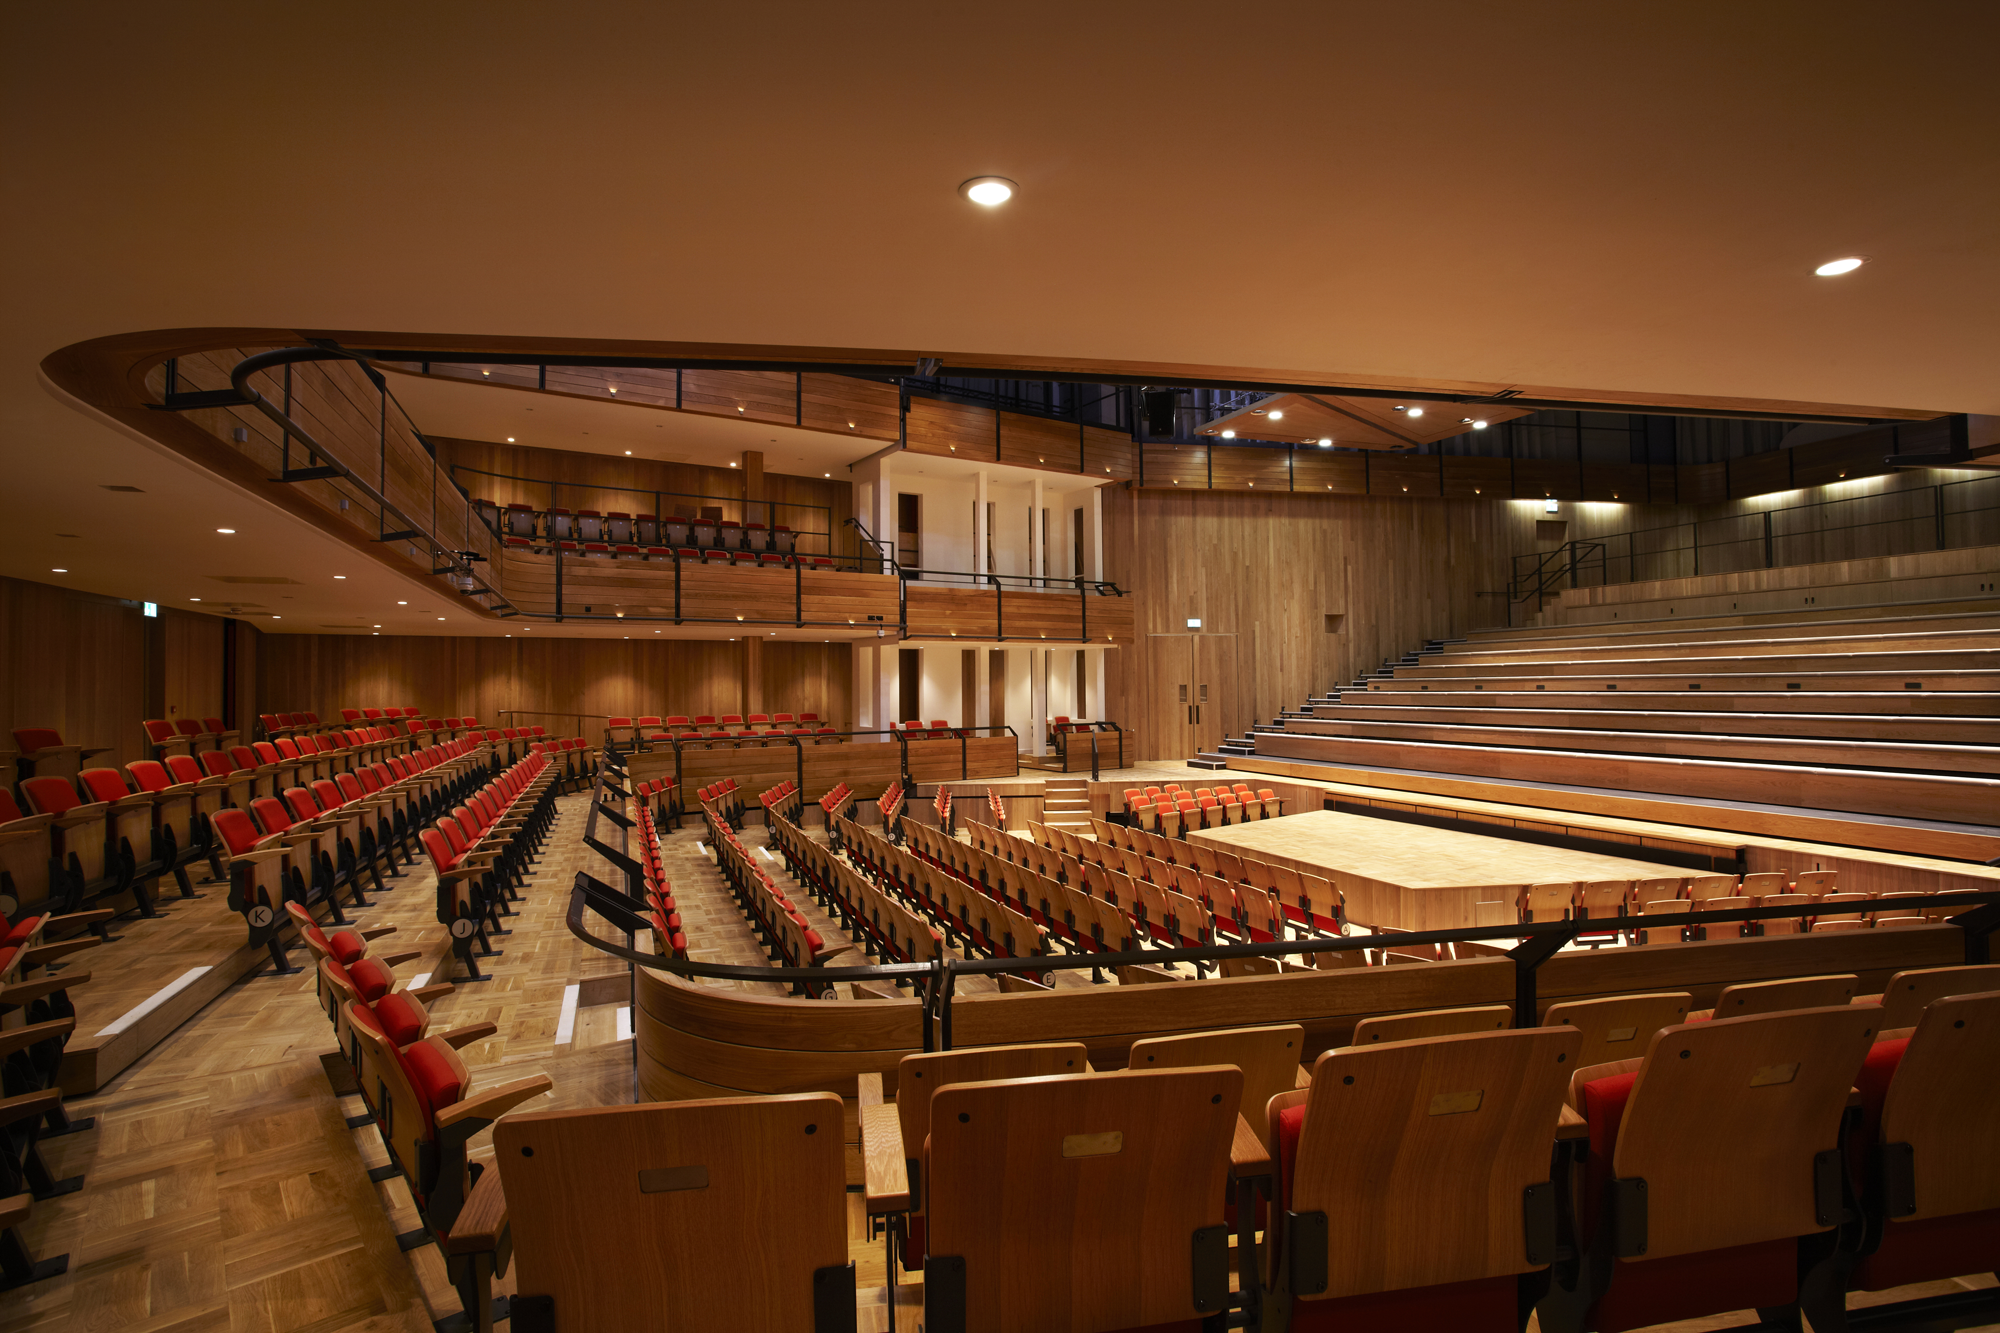 Bramall-from-rhs-seating-2